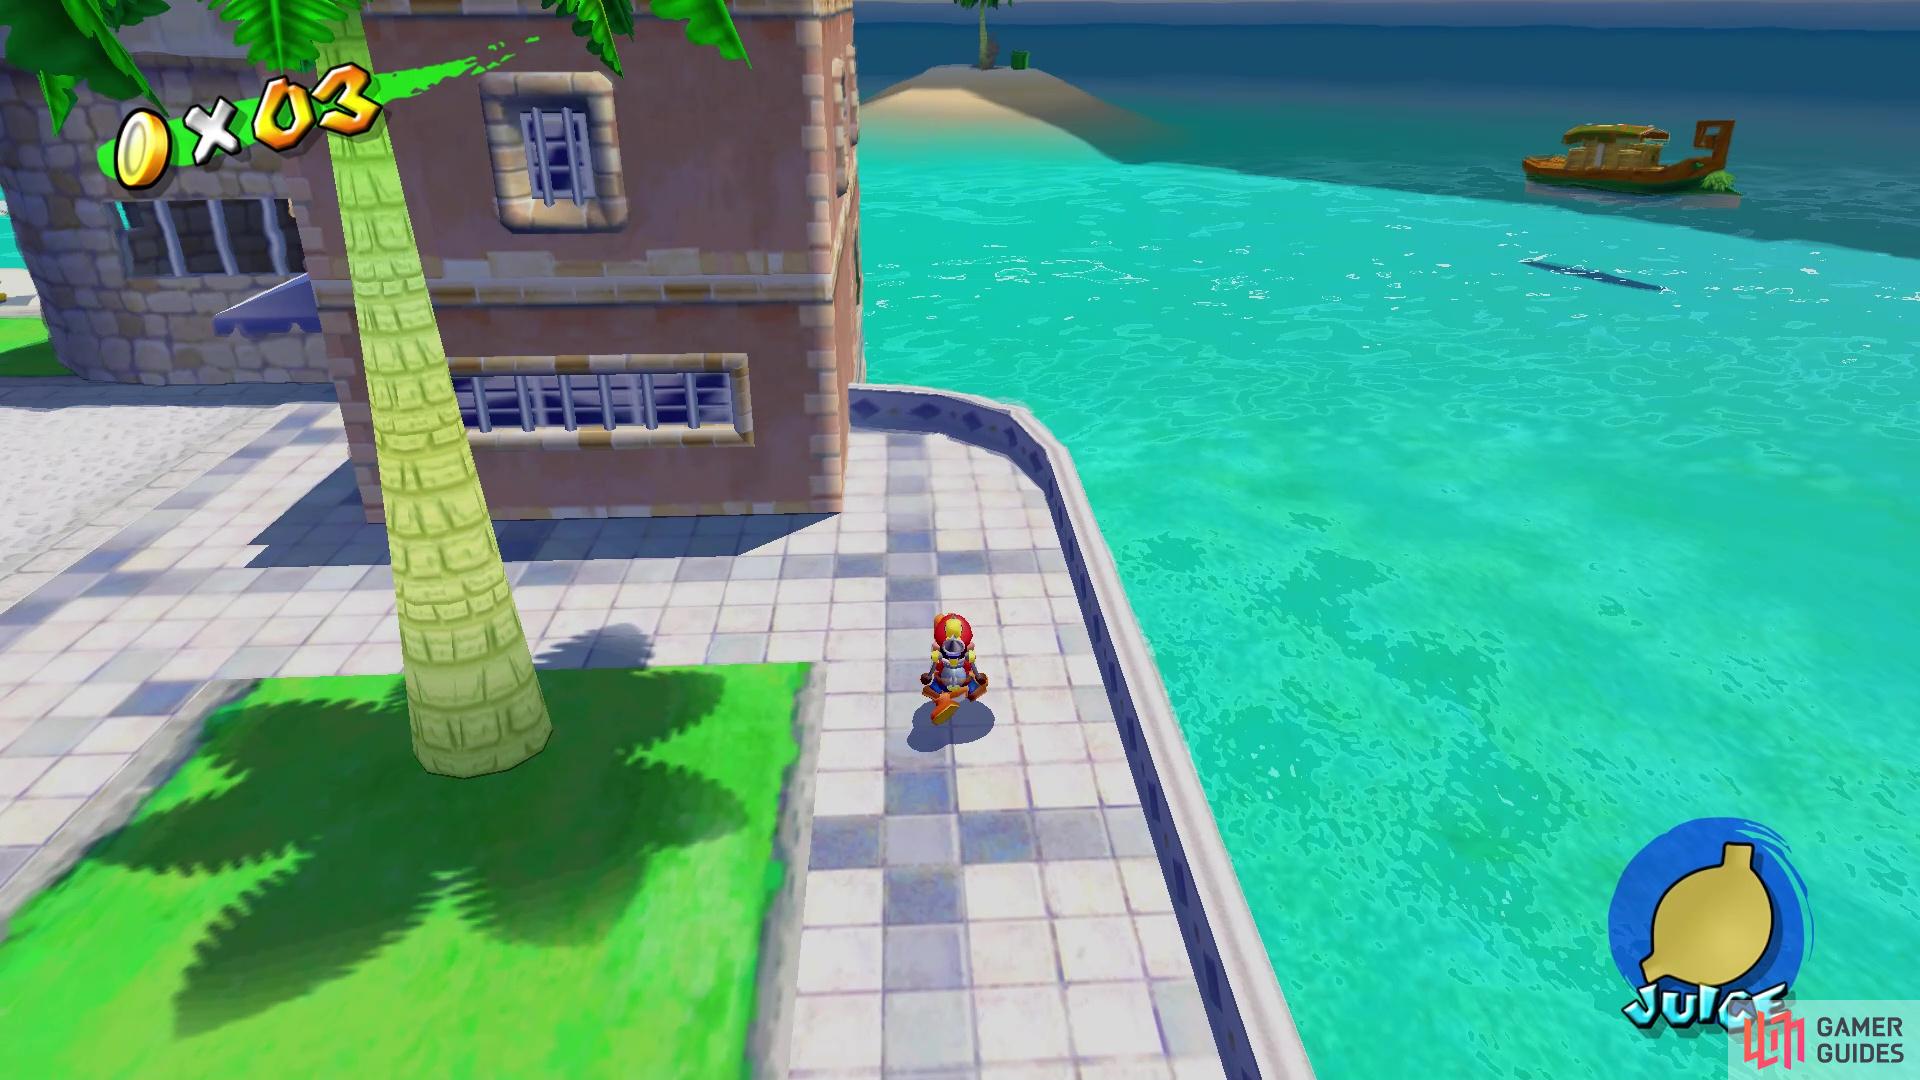 You will be going to the island in the distance with Yoshi